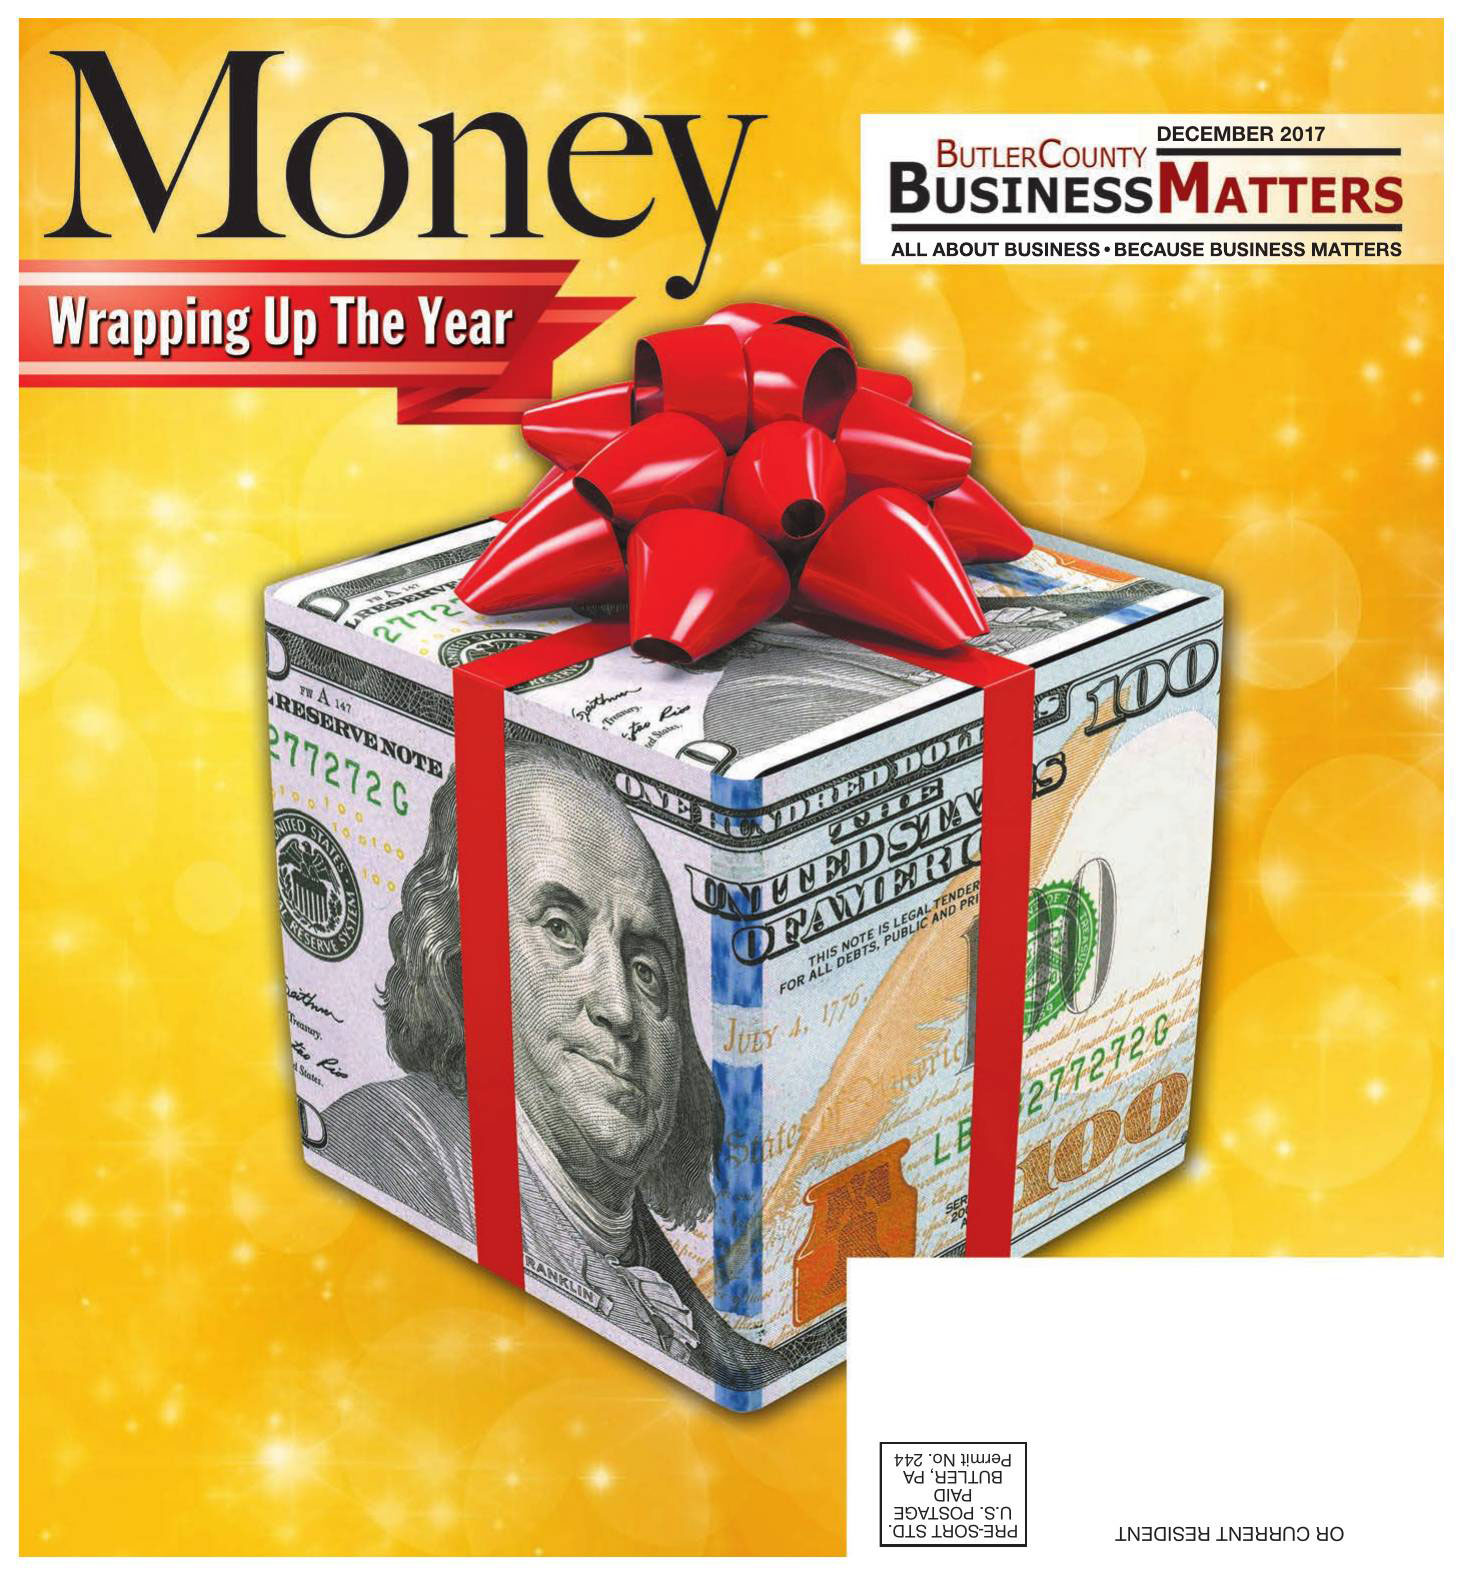 December 2017 - Money - Wrapping Up the Year